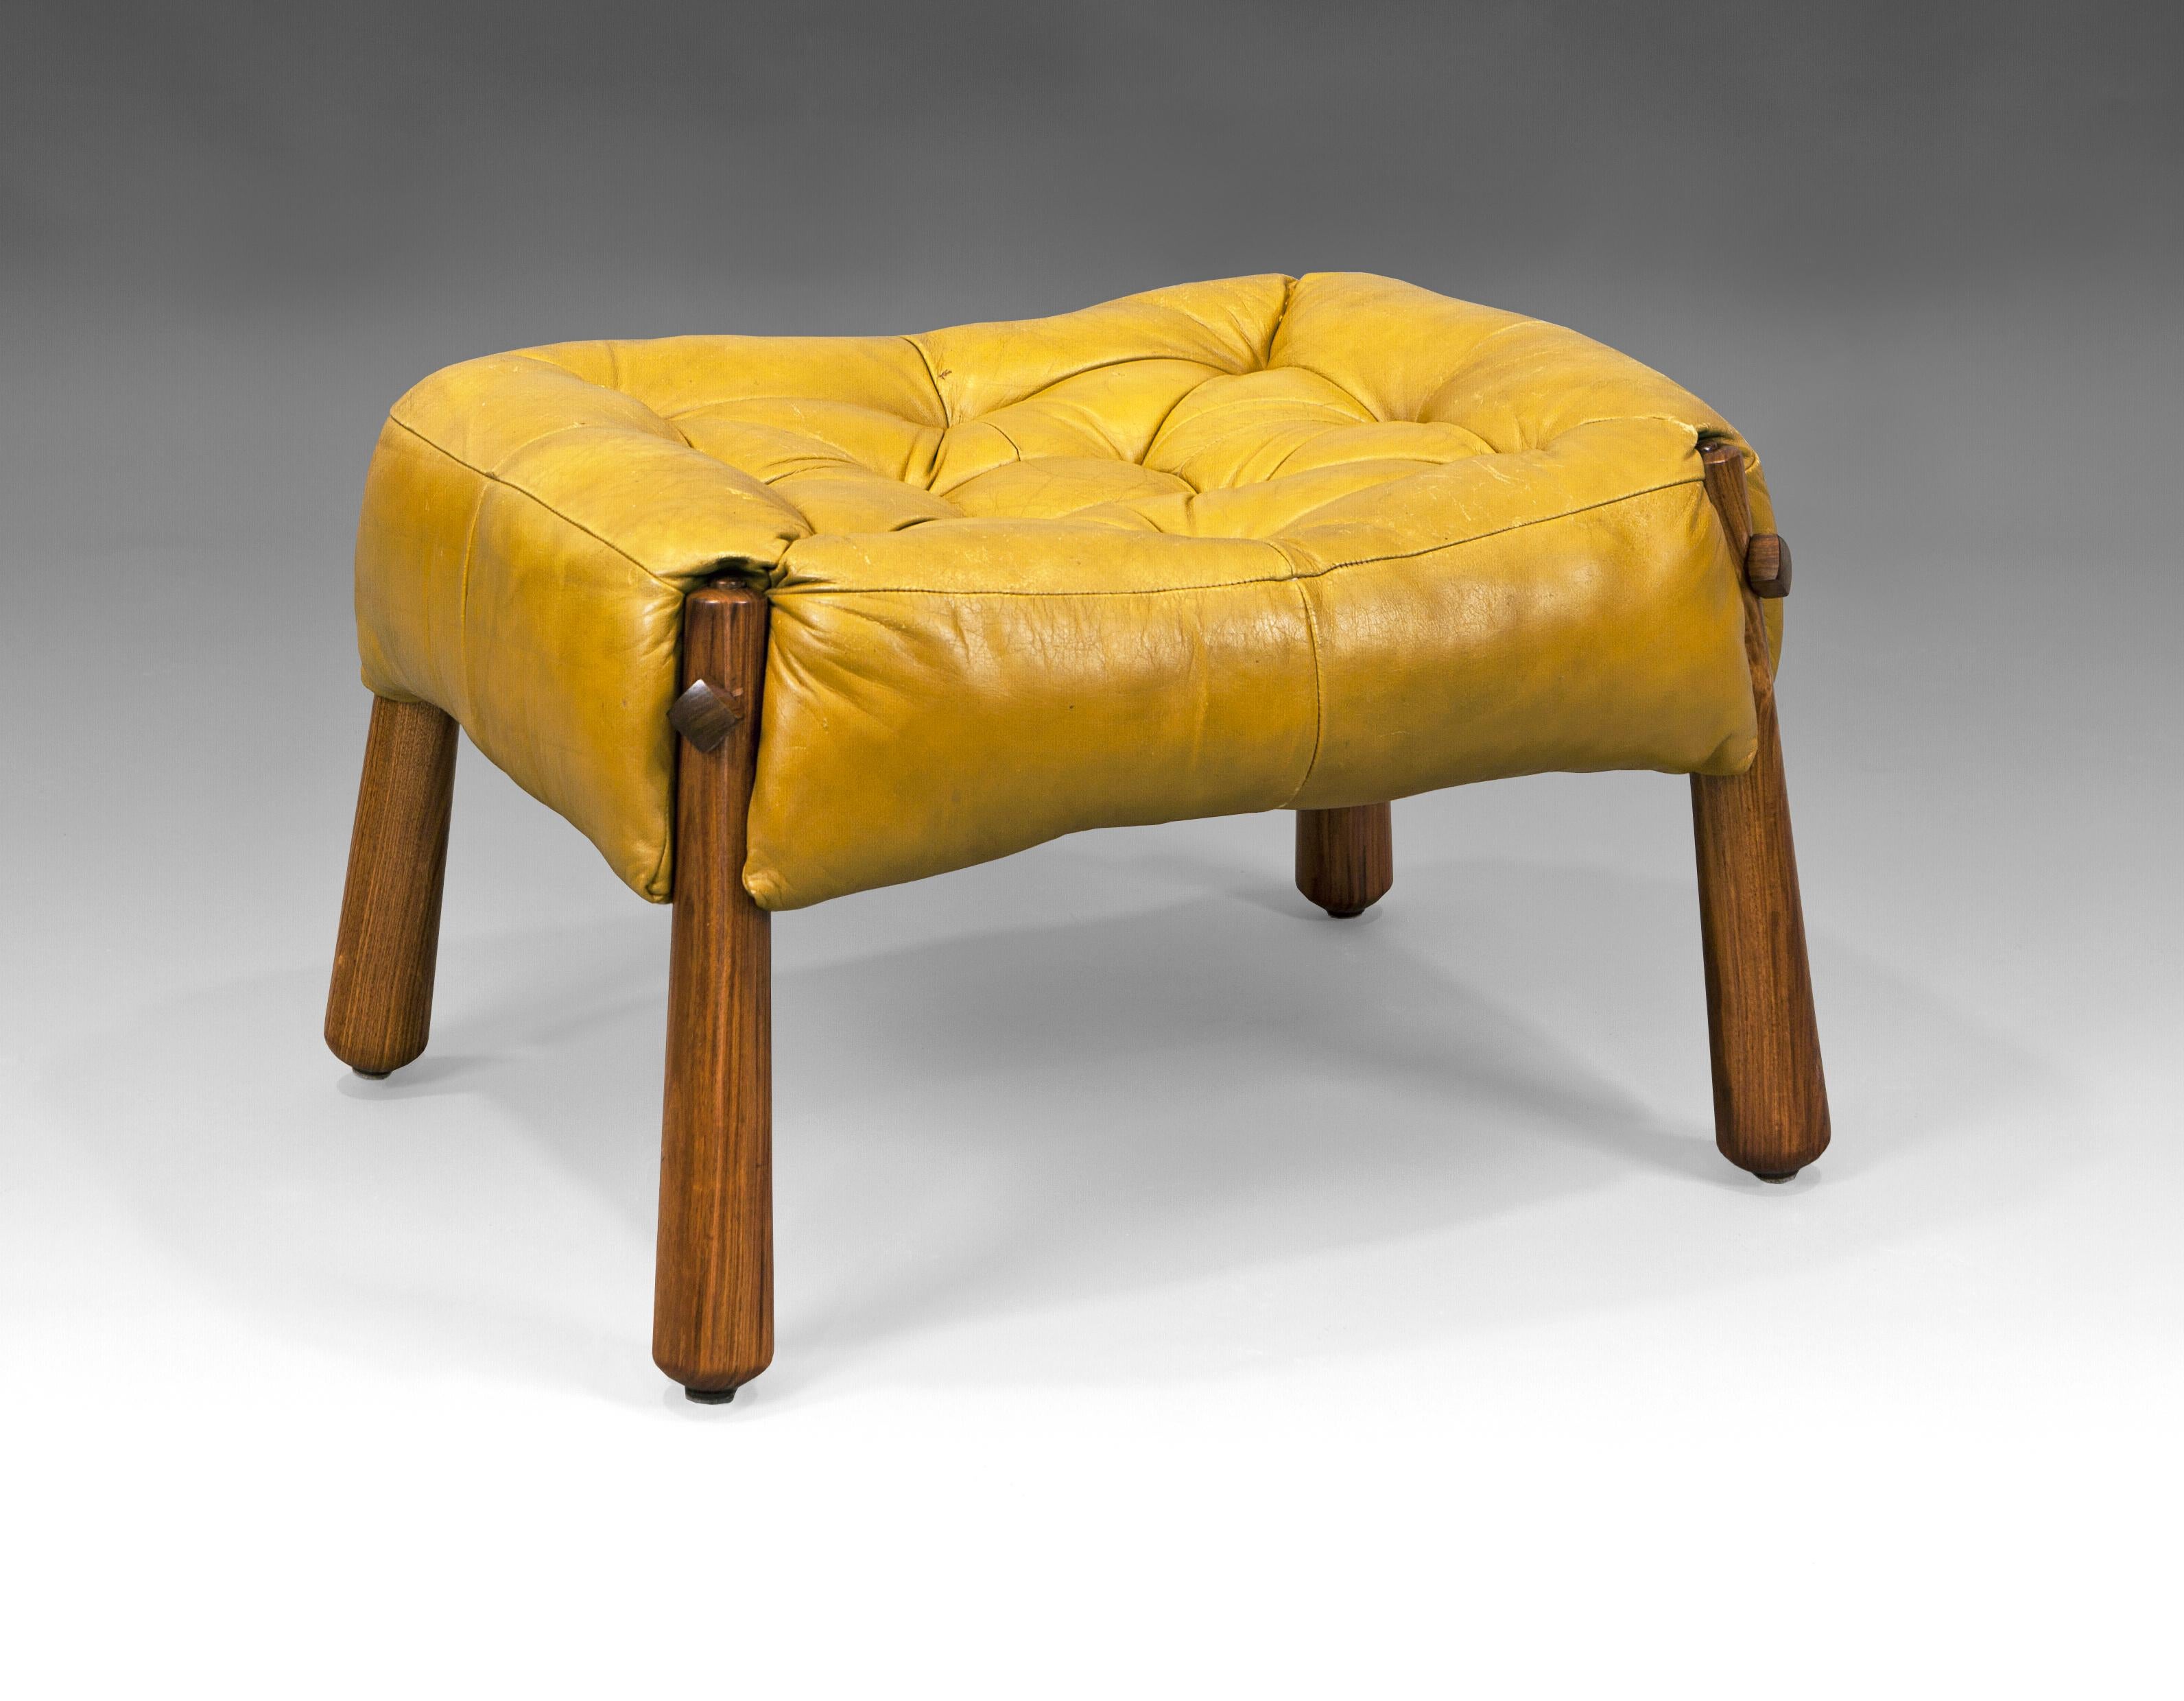 Rosewood tapered legs and yellow leather ottoman/footstool designed by Brazilian Architect Percival Lafer. Brazil, 1970s. 
Percival Lafer is considered one of Brazilian Modernism Pioneers. Attracted to engineering and mechanisms, he studied